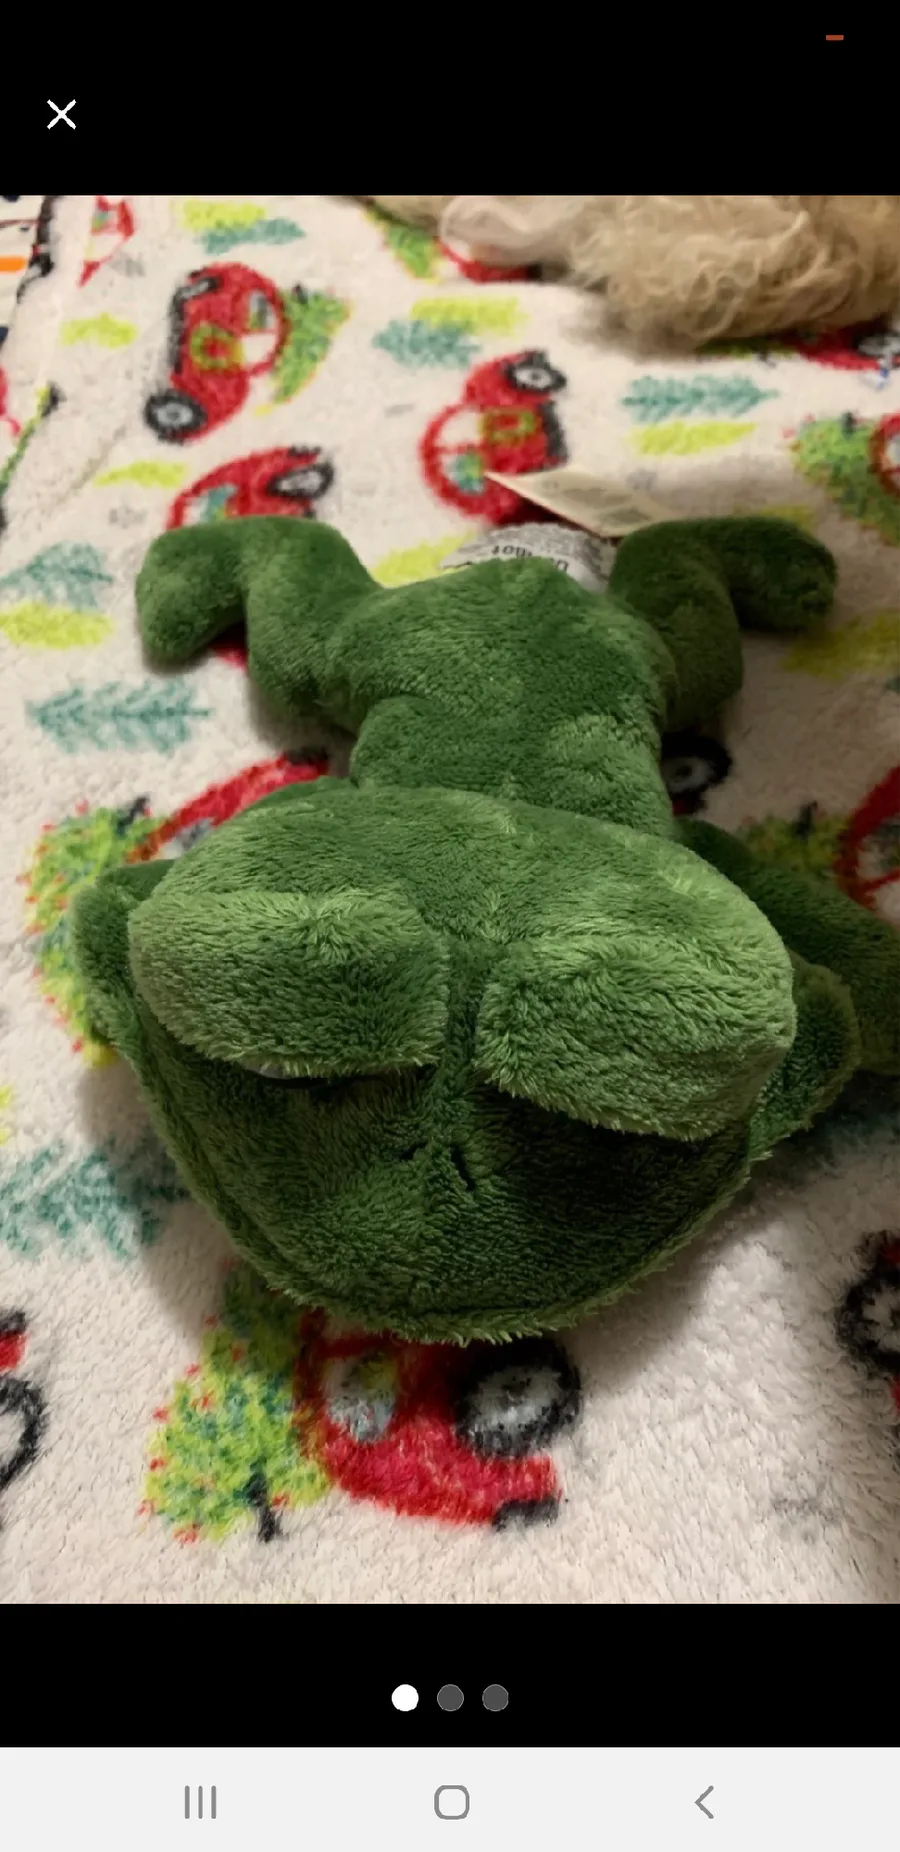 froggycollector8 on Game Jolt: Five nights with froggy plush is